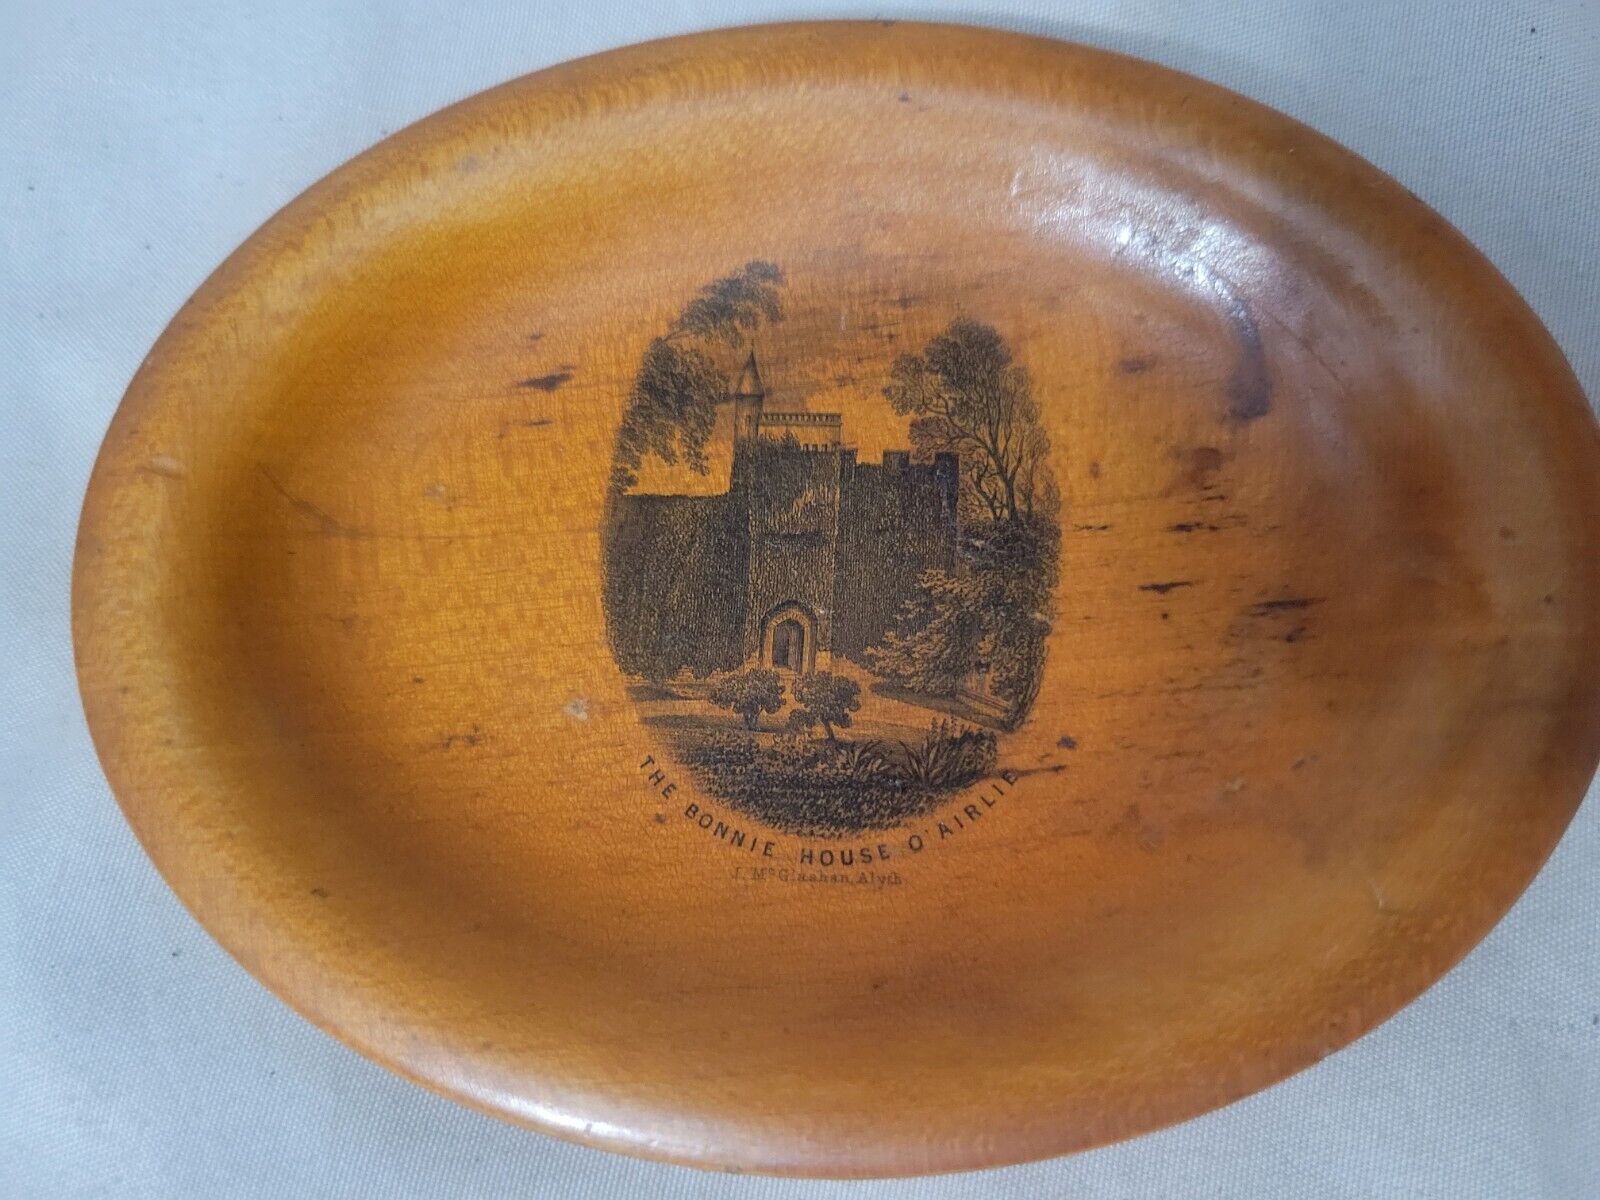  Rare Antique Mauchline Ware Plate 4.5x.5x3in ca 1880  The Bonnie house O\'Airlie